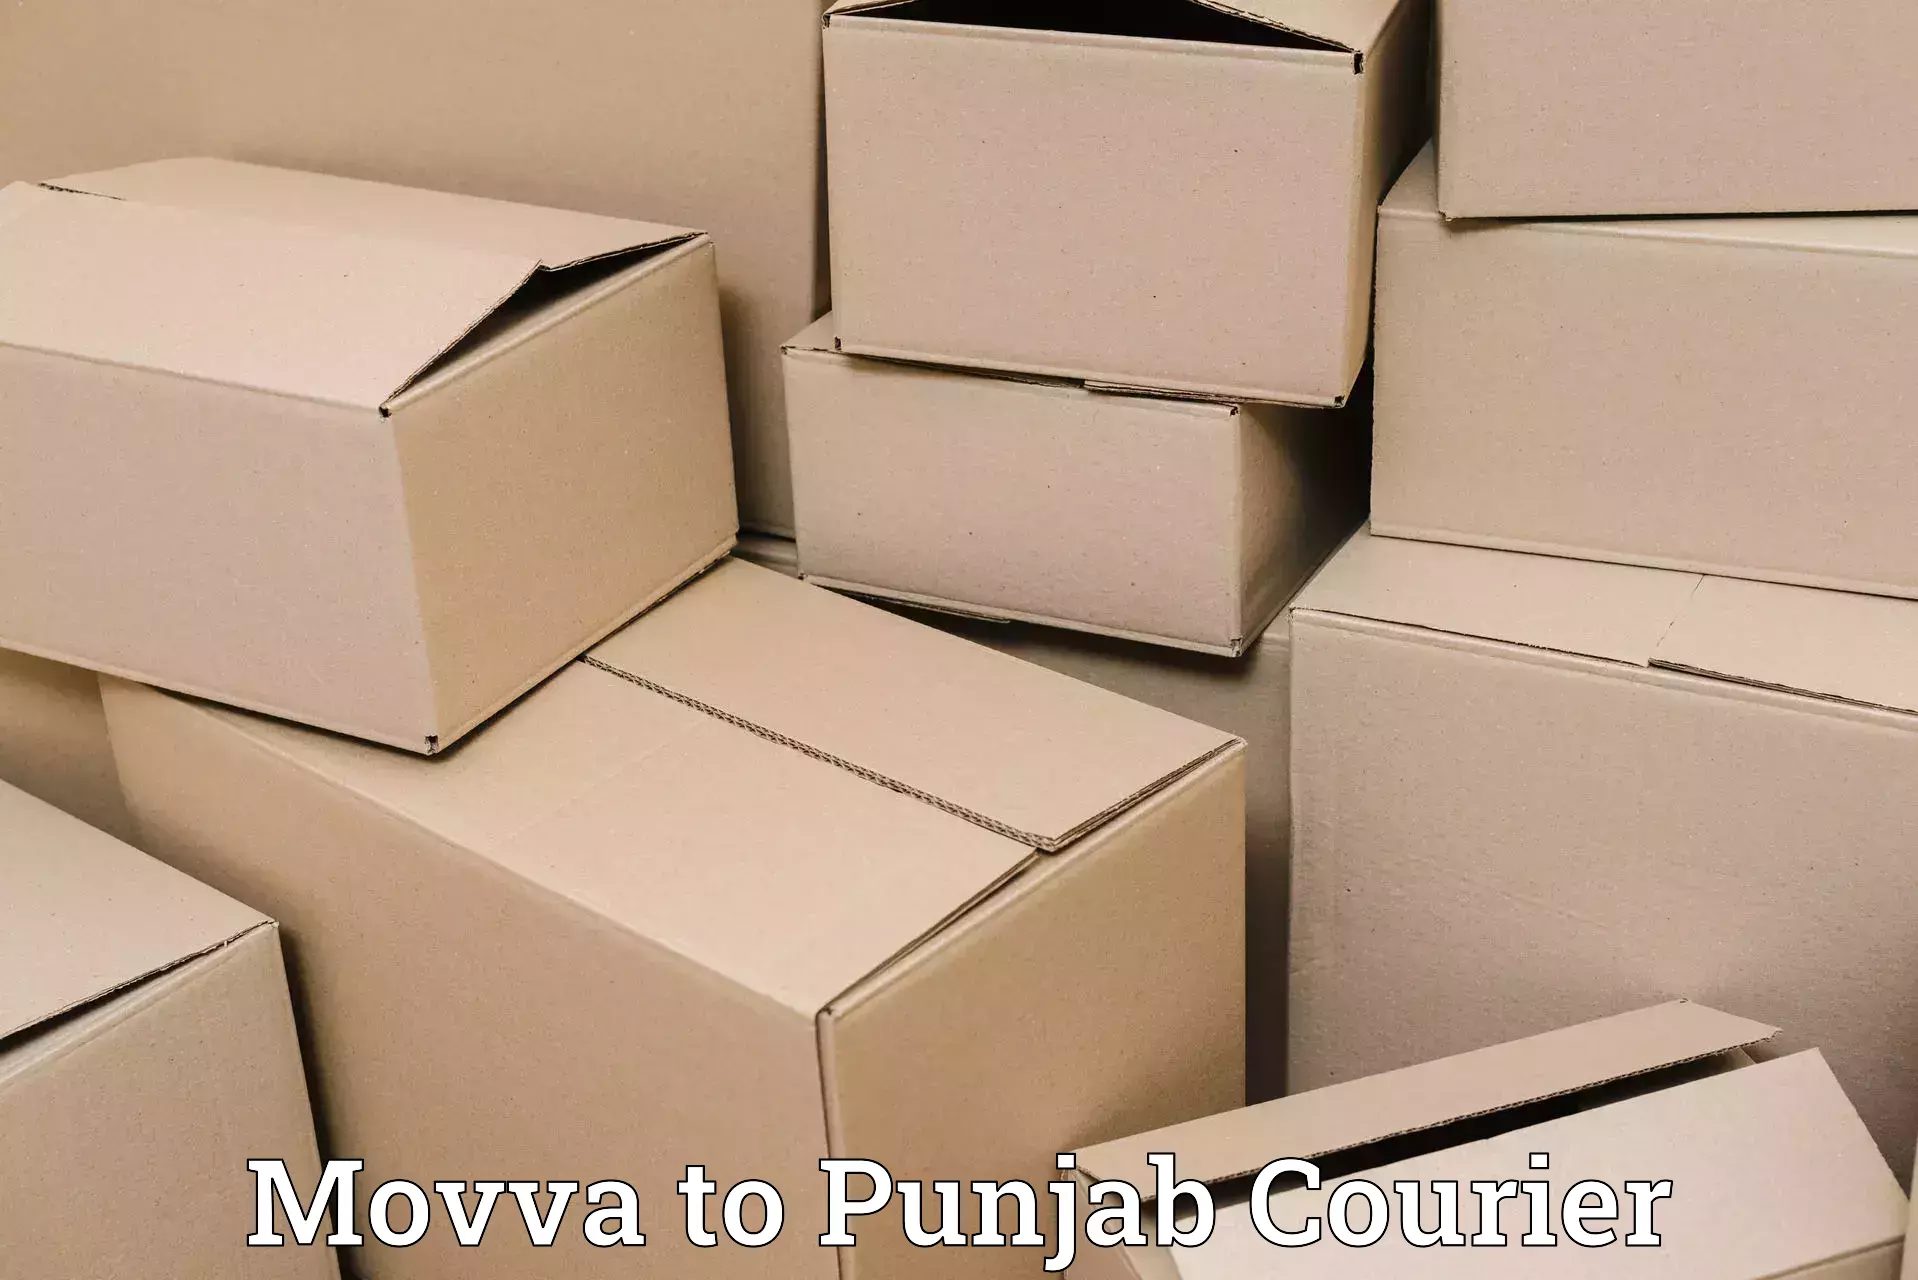 Tailored delivery services Movva to Punjab